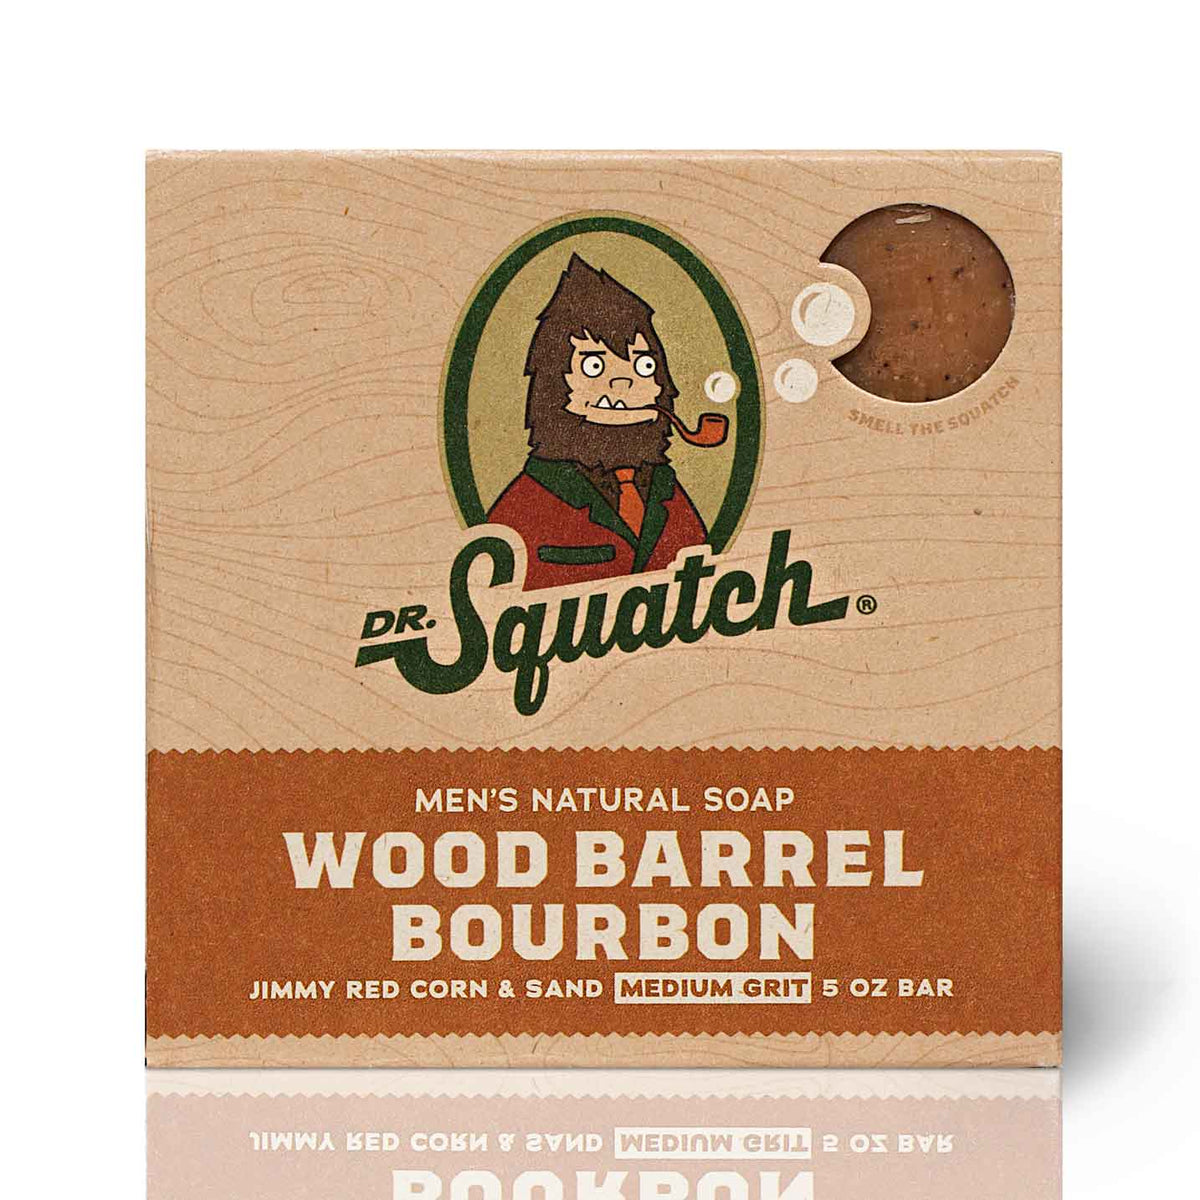 The Ultimate Guide to Bar Soap for Men - Dr. Squatch